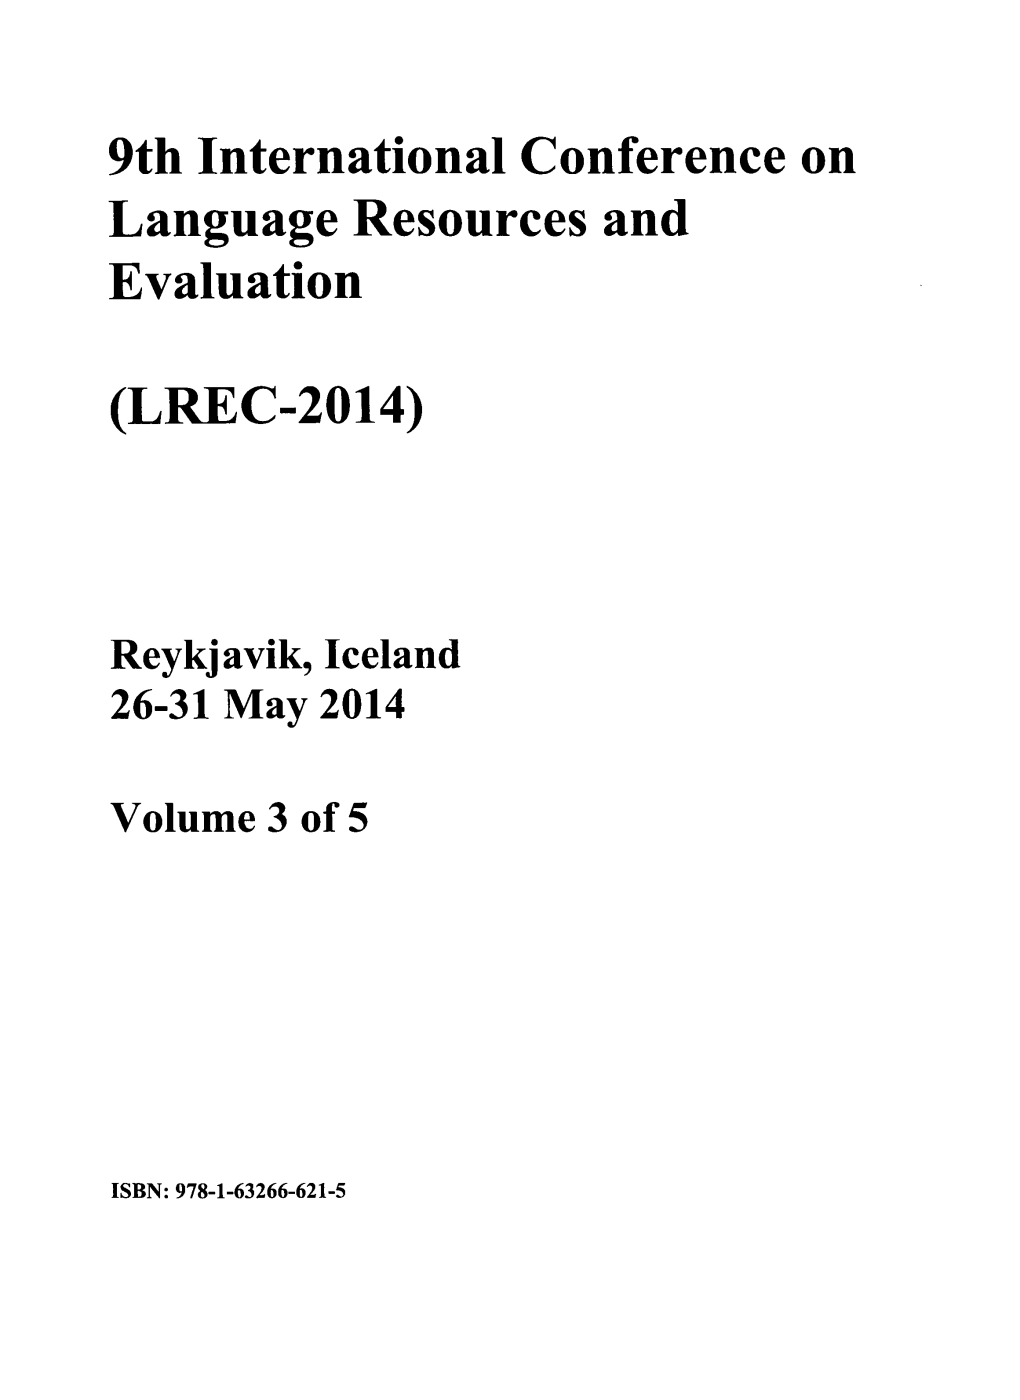 9Th International Conference Language Resources and Evaluation